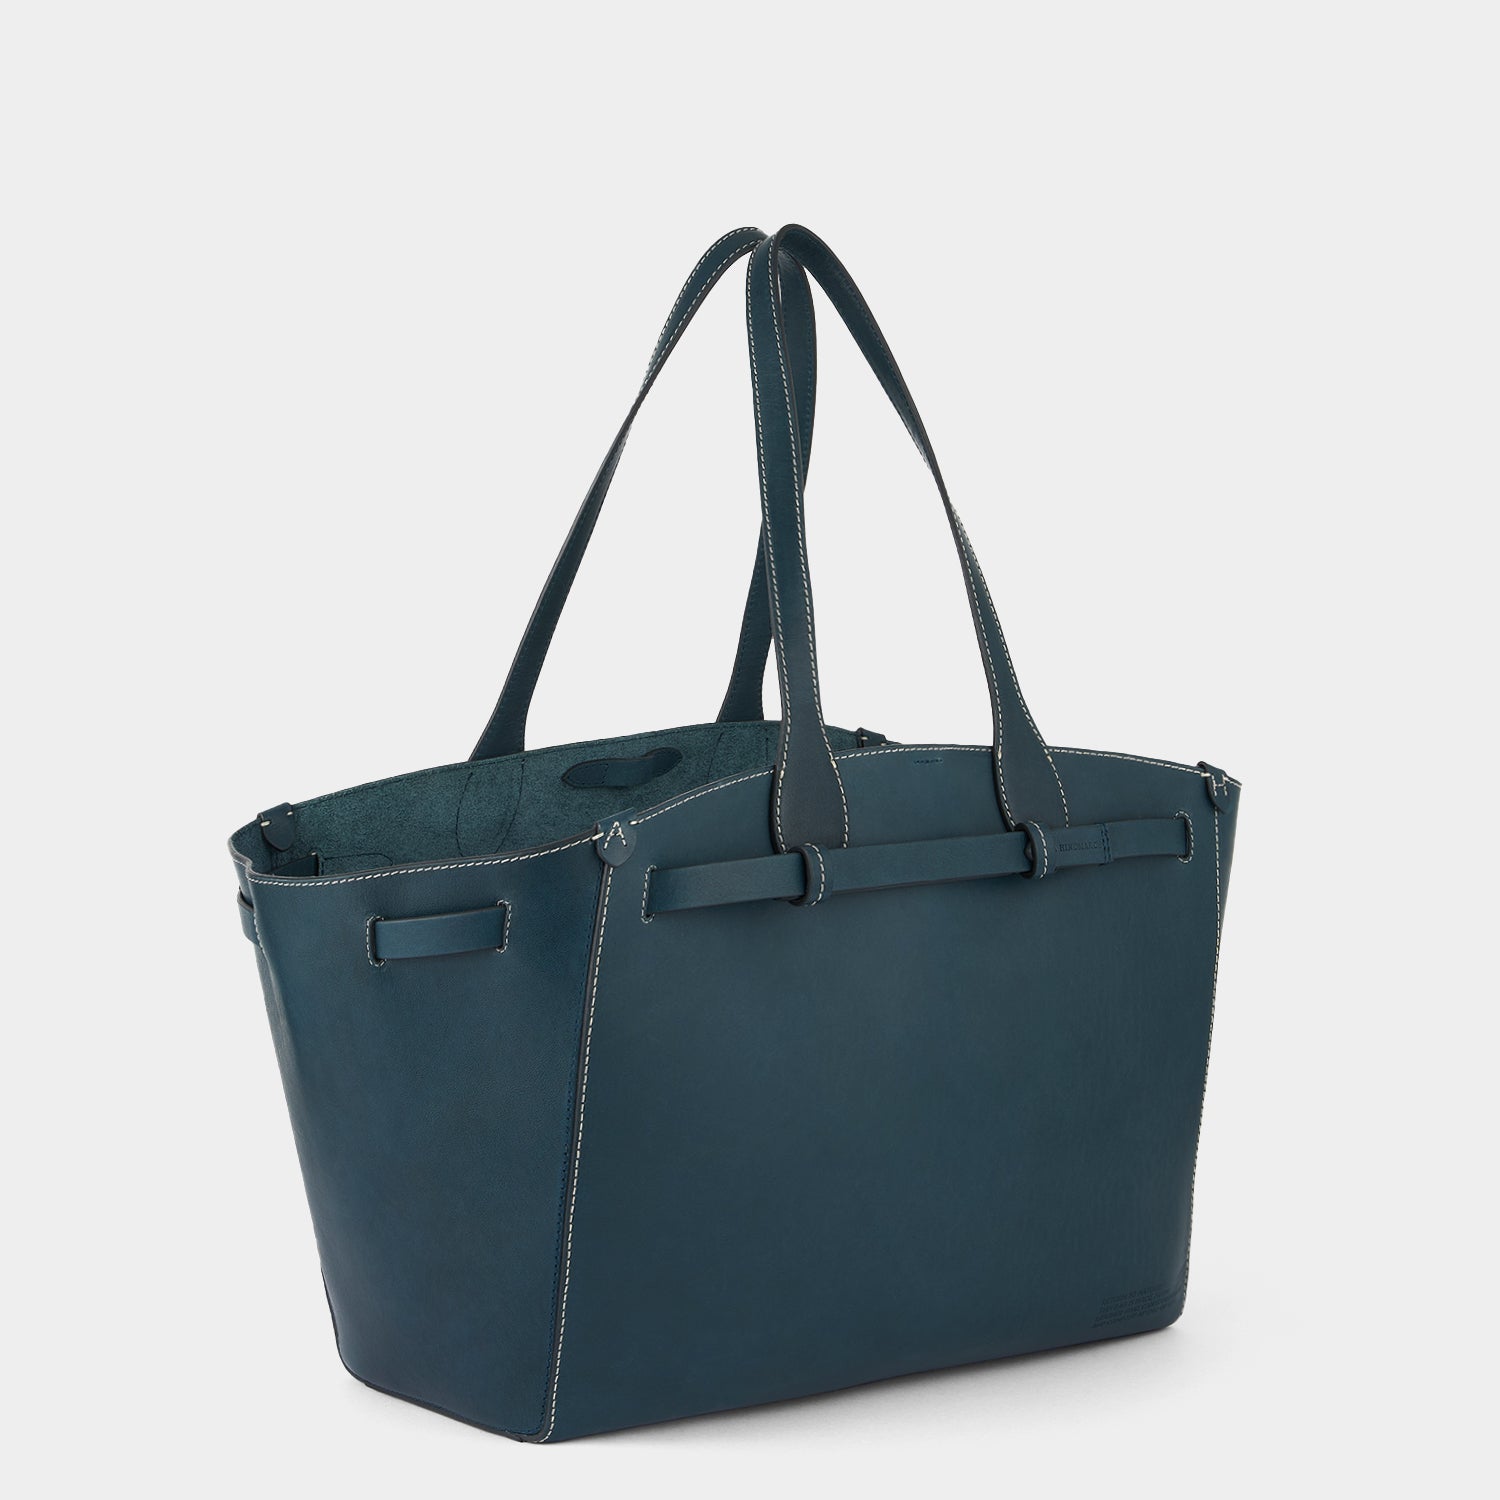 Return to Nature Tote -

                  
                    Compostable Leather in Dark Holly -
                  

                  Anya Hindmarch EU
